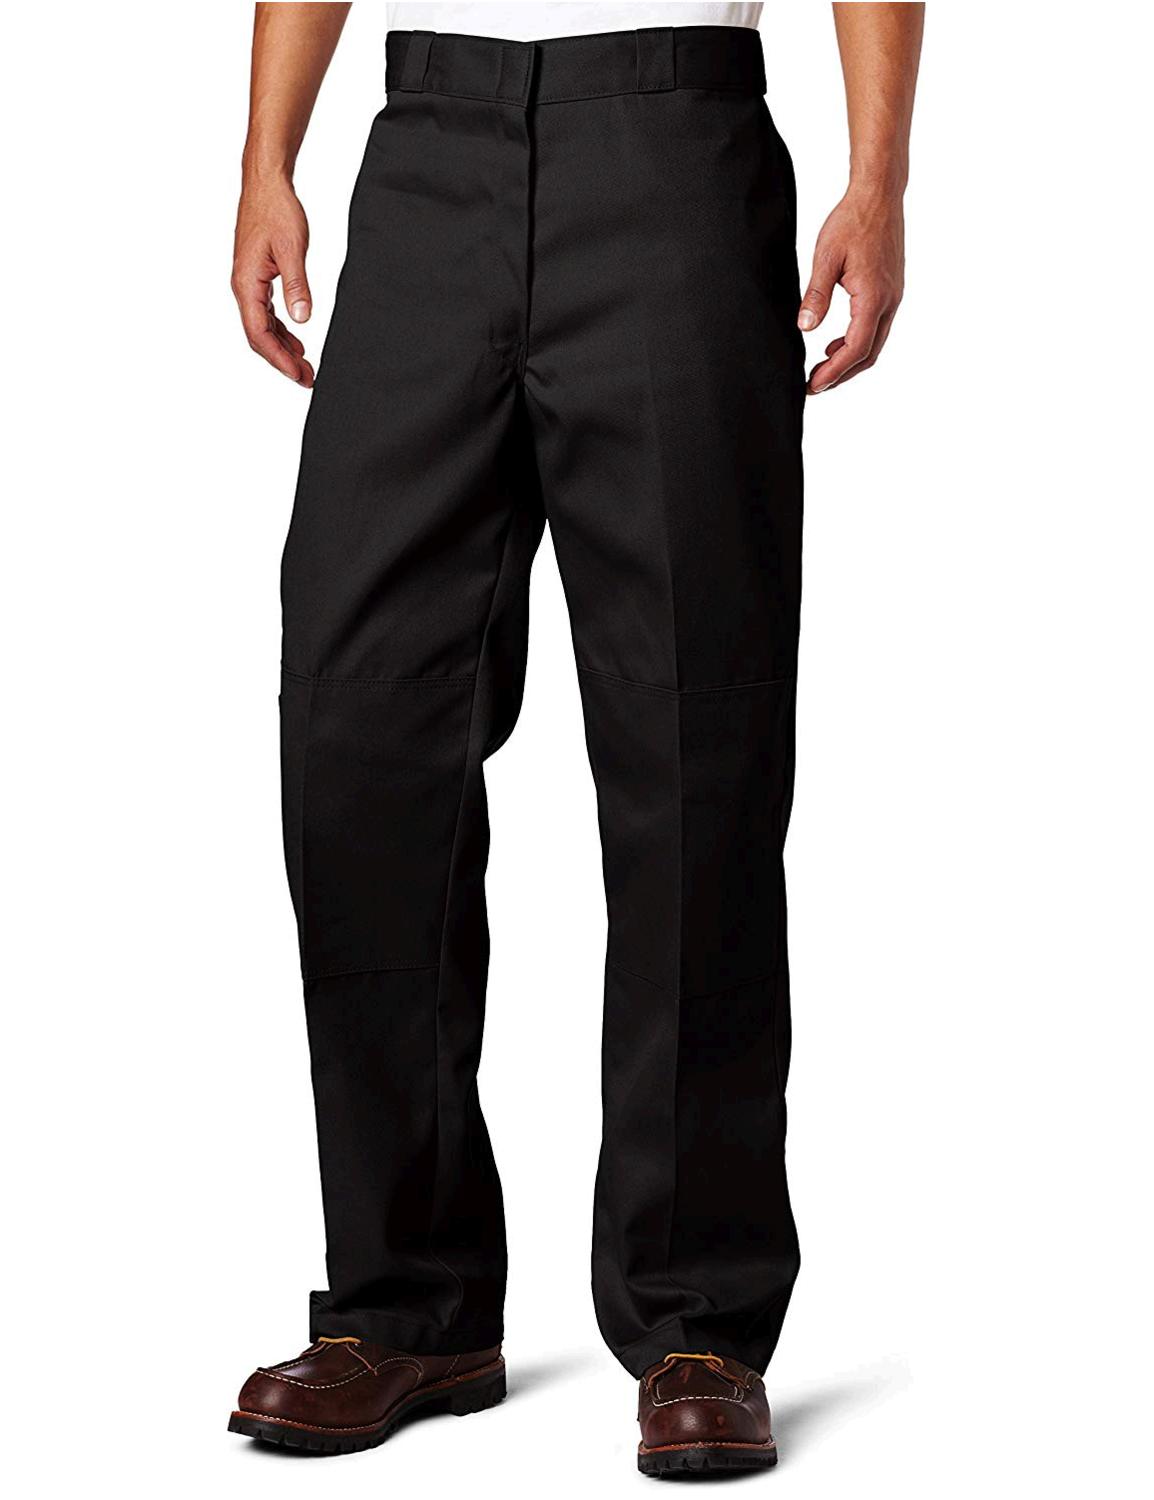 Dickies Men's Loose Fit Double Knee Twill Work Pant,, Black, Size 42W x ...